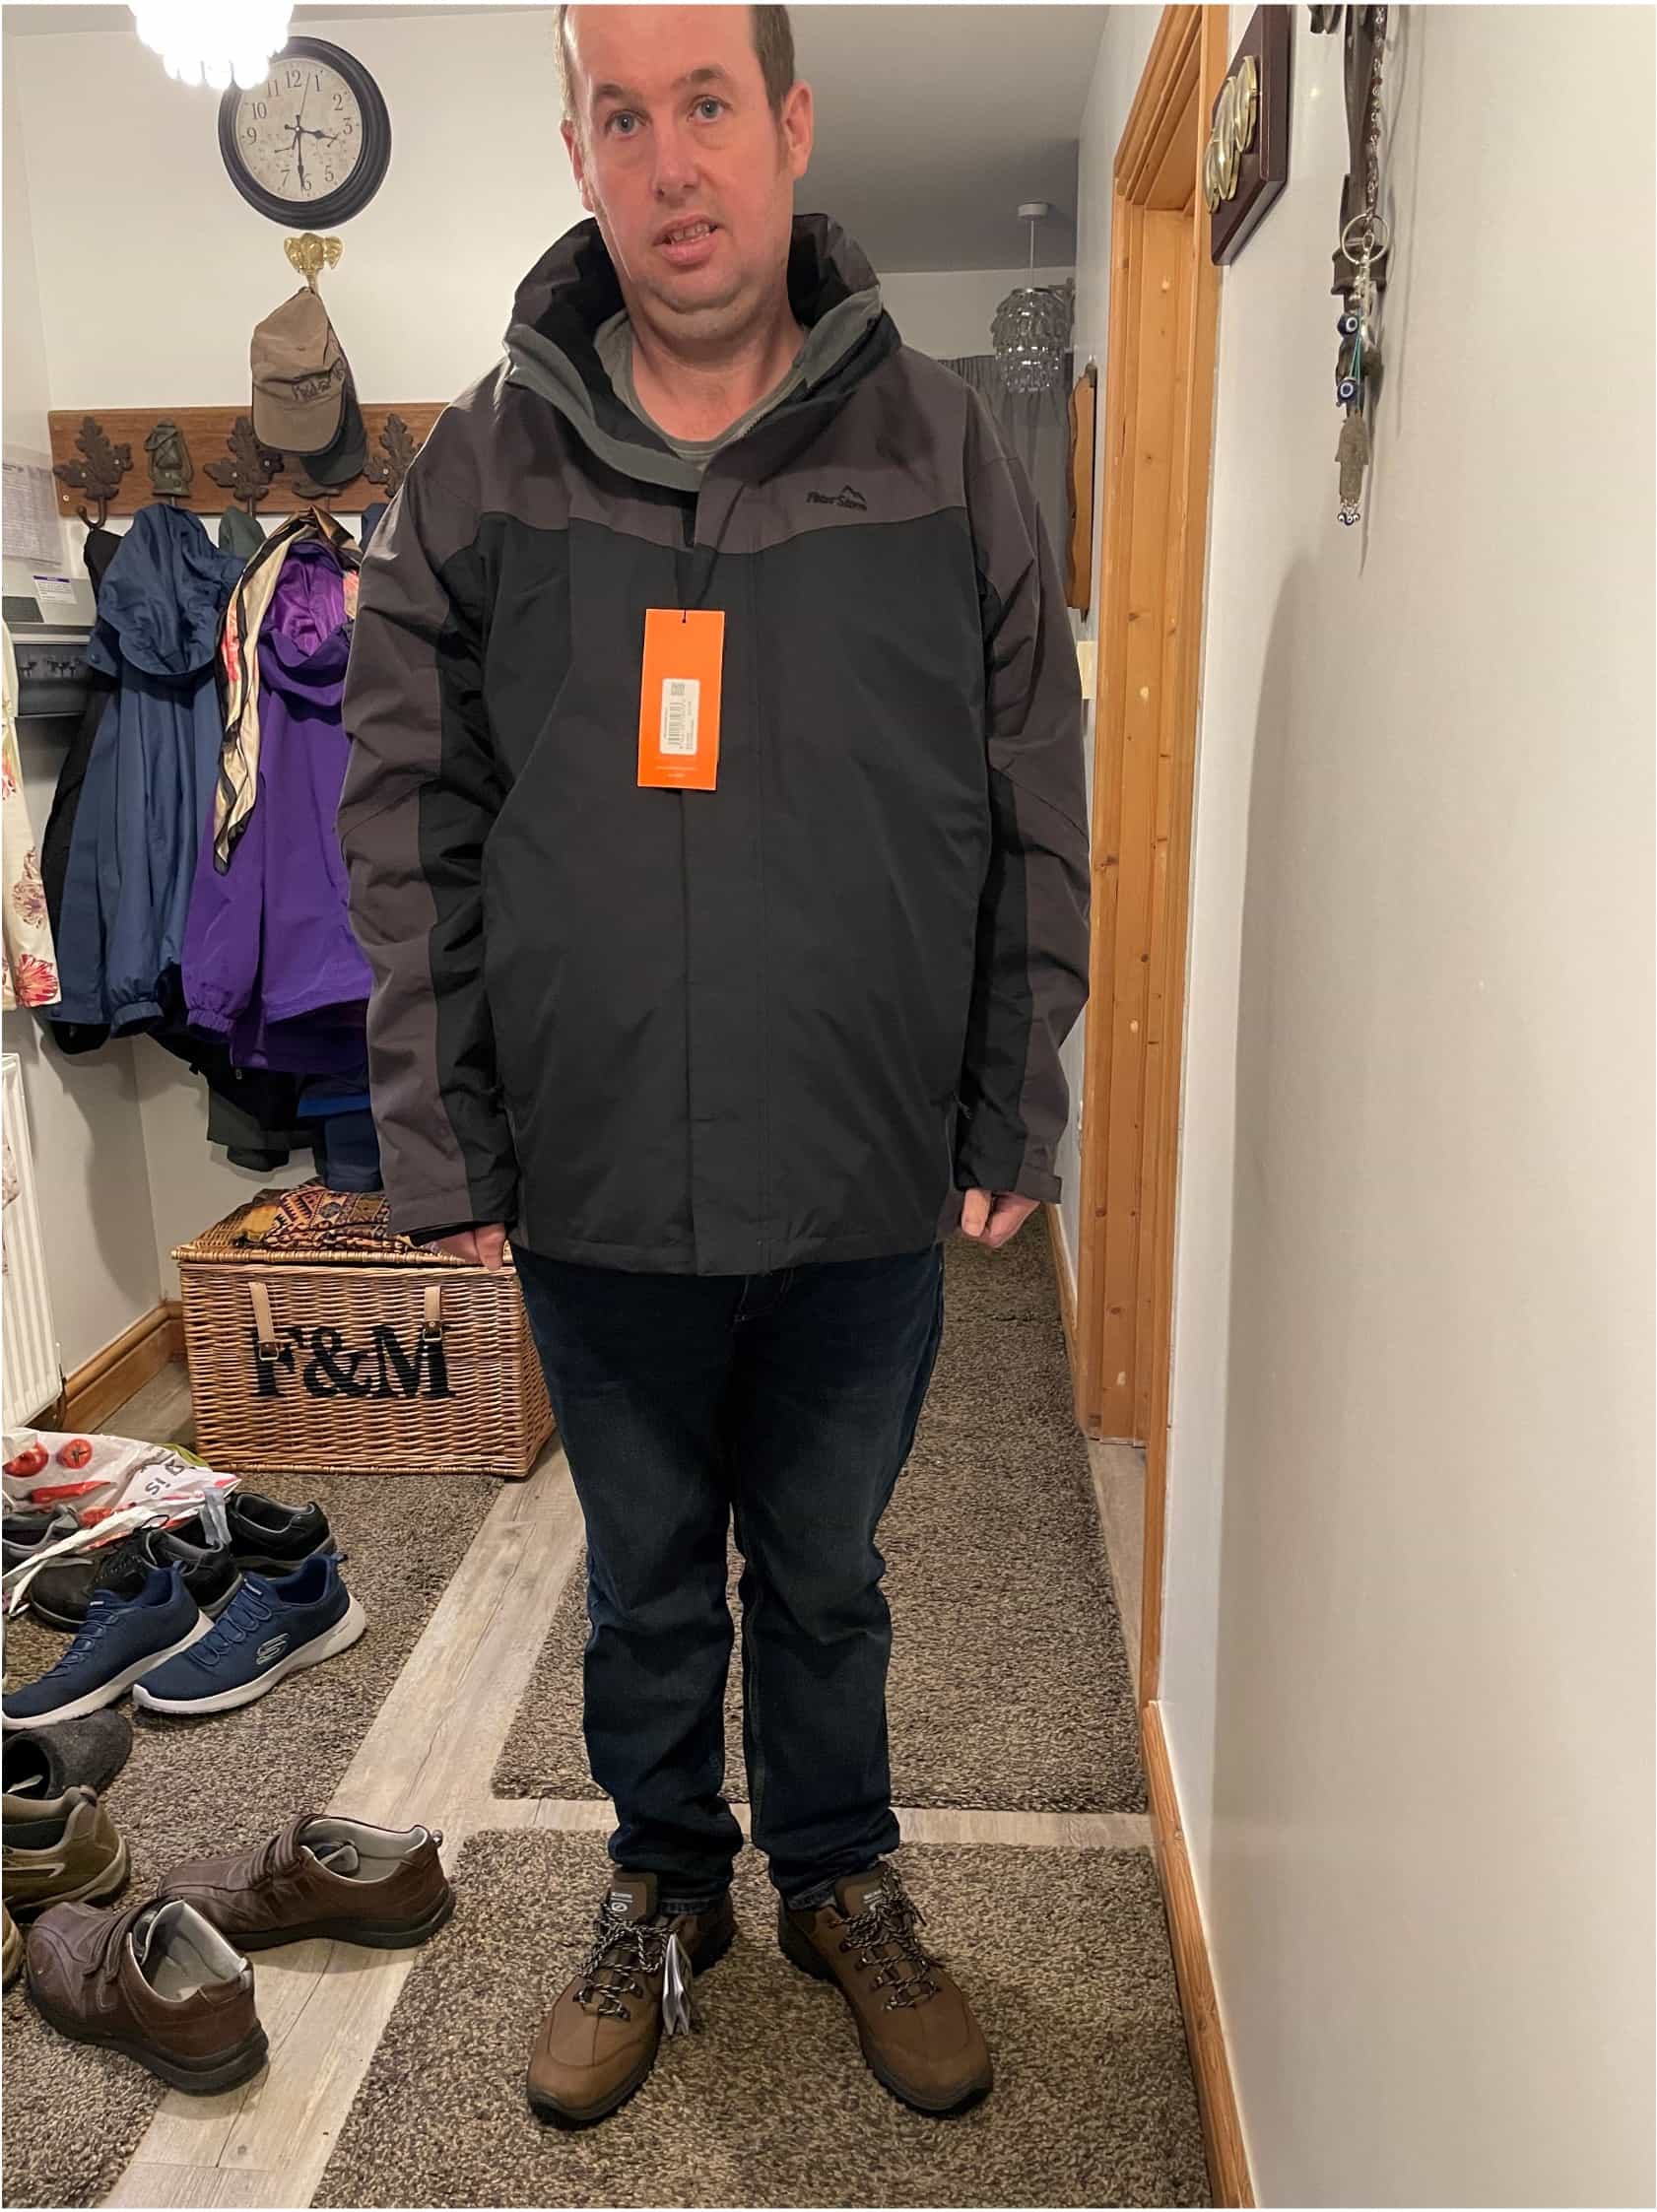 James, who used his PHB to buy new walking shoes and a waterproof coat so he could continue walking his dog and keep up his wellbeing during winter.